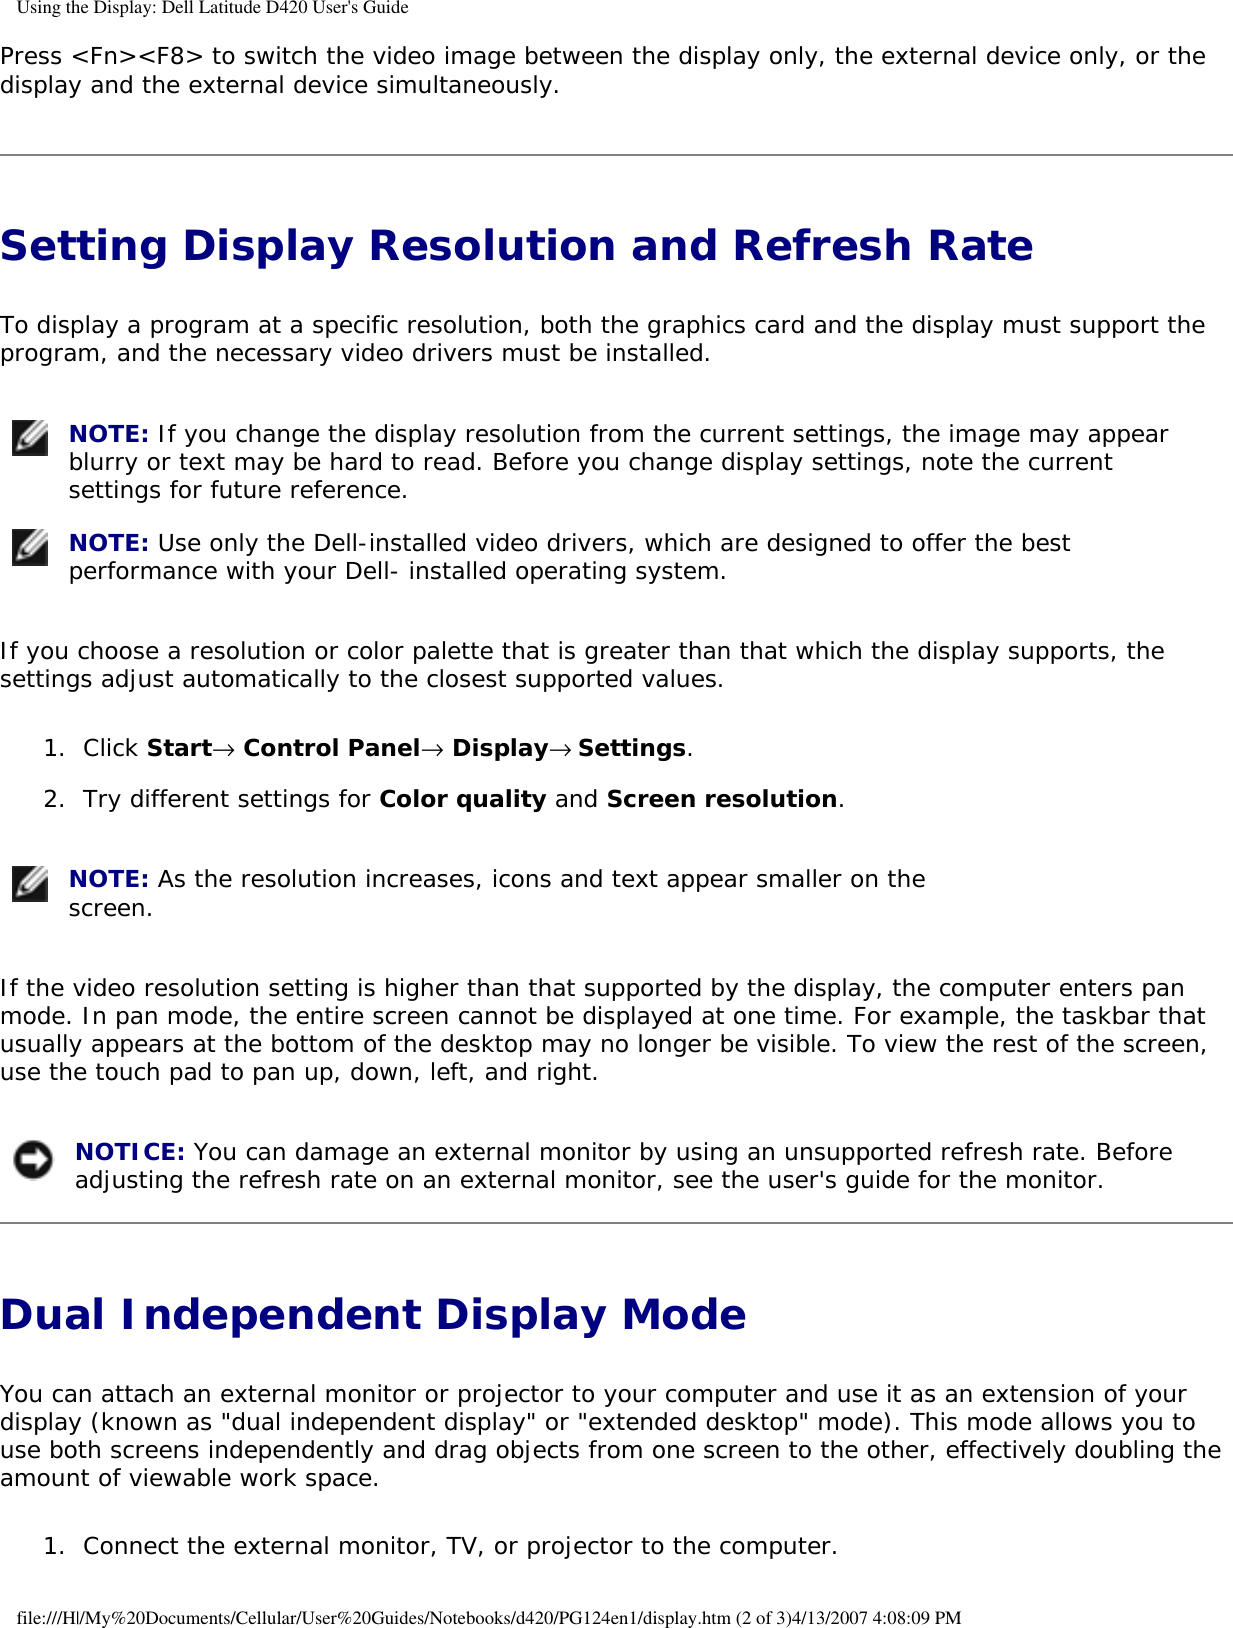 Using the Display: Dell Latitude D420 User&apos;s GuidePress &lt;Fn&gt;&lt;F8&gt; to switch the video image between the display only, the external device only, or the display and the external device simultaneously.Setting Display Resolution and Refresh Rate To display a program at a specific resolution, both the graphics card and the display must support the program, and the necessary video drivers must be installed. NOTE: If you change the display resolution from the current settings, the image may appear blurry or text may be hard to read. Before you change display settings, note the current settings for future reference.  NOTE: Use only the Dell-installed video drivers, which are designed to offer the best performance with your Dell- installed operating system. If you choose a resolution or color palette that is greater than that which the display supports, the settings adjust automatically to the closest supported values.1.  Click Start→ Control Panel→ Display→ Settings.   2.  Try different settings for Color quality and Screen resolution.    NOTE: As the resolution increases, icons and text appear smaller on the screen. If the video resolution setting is higher than that supported by the display, the computer enters pan mode. In pan mode, the entire screen cannot be displayed at one time. For example, the taskbar that usually appears at the bottom of the desktop may no longer be visible. To view the rest of the screen, use the touch pad to pan up, down, left, and right. NOTICE: You can damage an external monitor by using an unsupported refresh rate. Before adjusting the refresh rate on an external monitor, see the user&apos;s guide for the monitor. Dual Independent Display Mode You can attach an external monitor or projector to your computer and use it as an extension of your display (known as &quot;dual independent display&quot; or &quot;extended desktop&quot; mode). This mode allows you to use both screens independently and drag objects from one screen to the other, effectively doubling the amount of viewable work space.1.  Connect the external monitor, TV, or projector to the computer.  file:///H|/My%20Documents/Cellular/User%20Guides/Notebooks/d420/PG124en1/display.htm (2 of 3)4/13/2007 4:08:09 PM